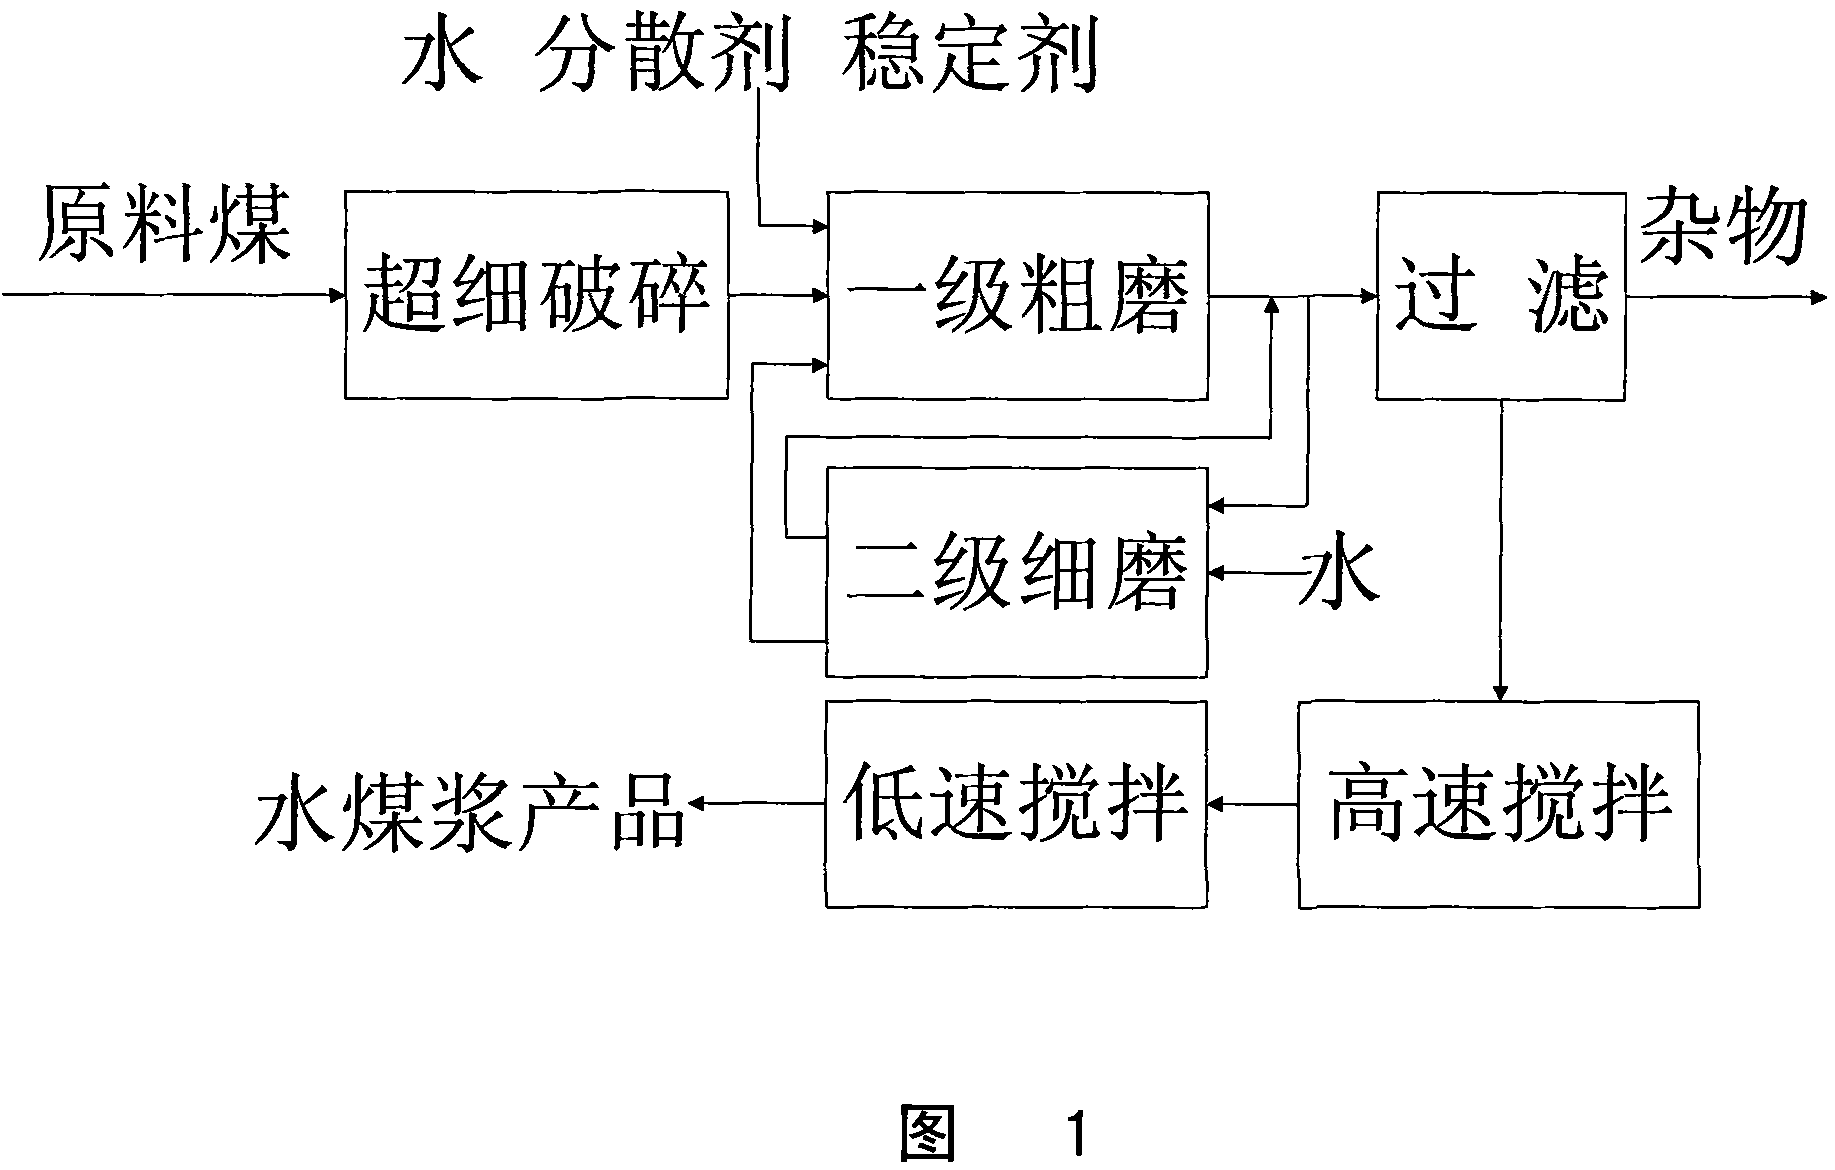 Method for preparing high concentration water-coal-slurry by low-rank coal